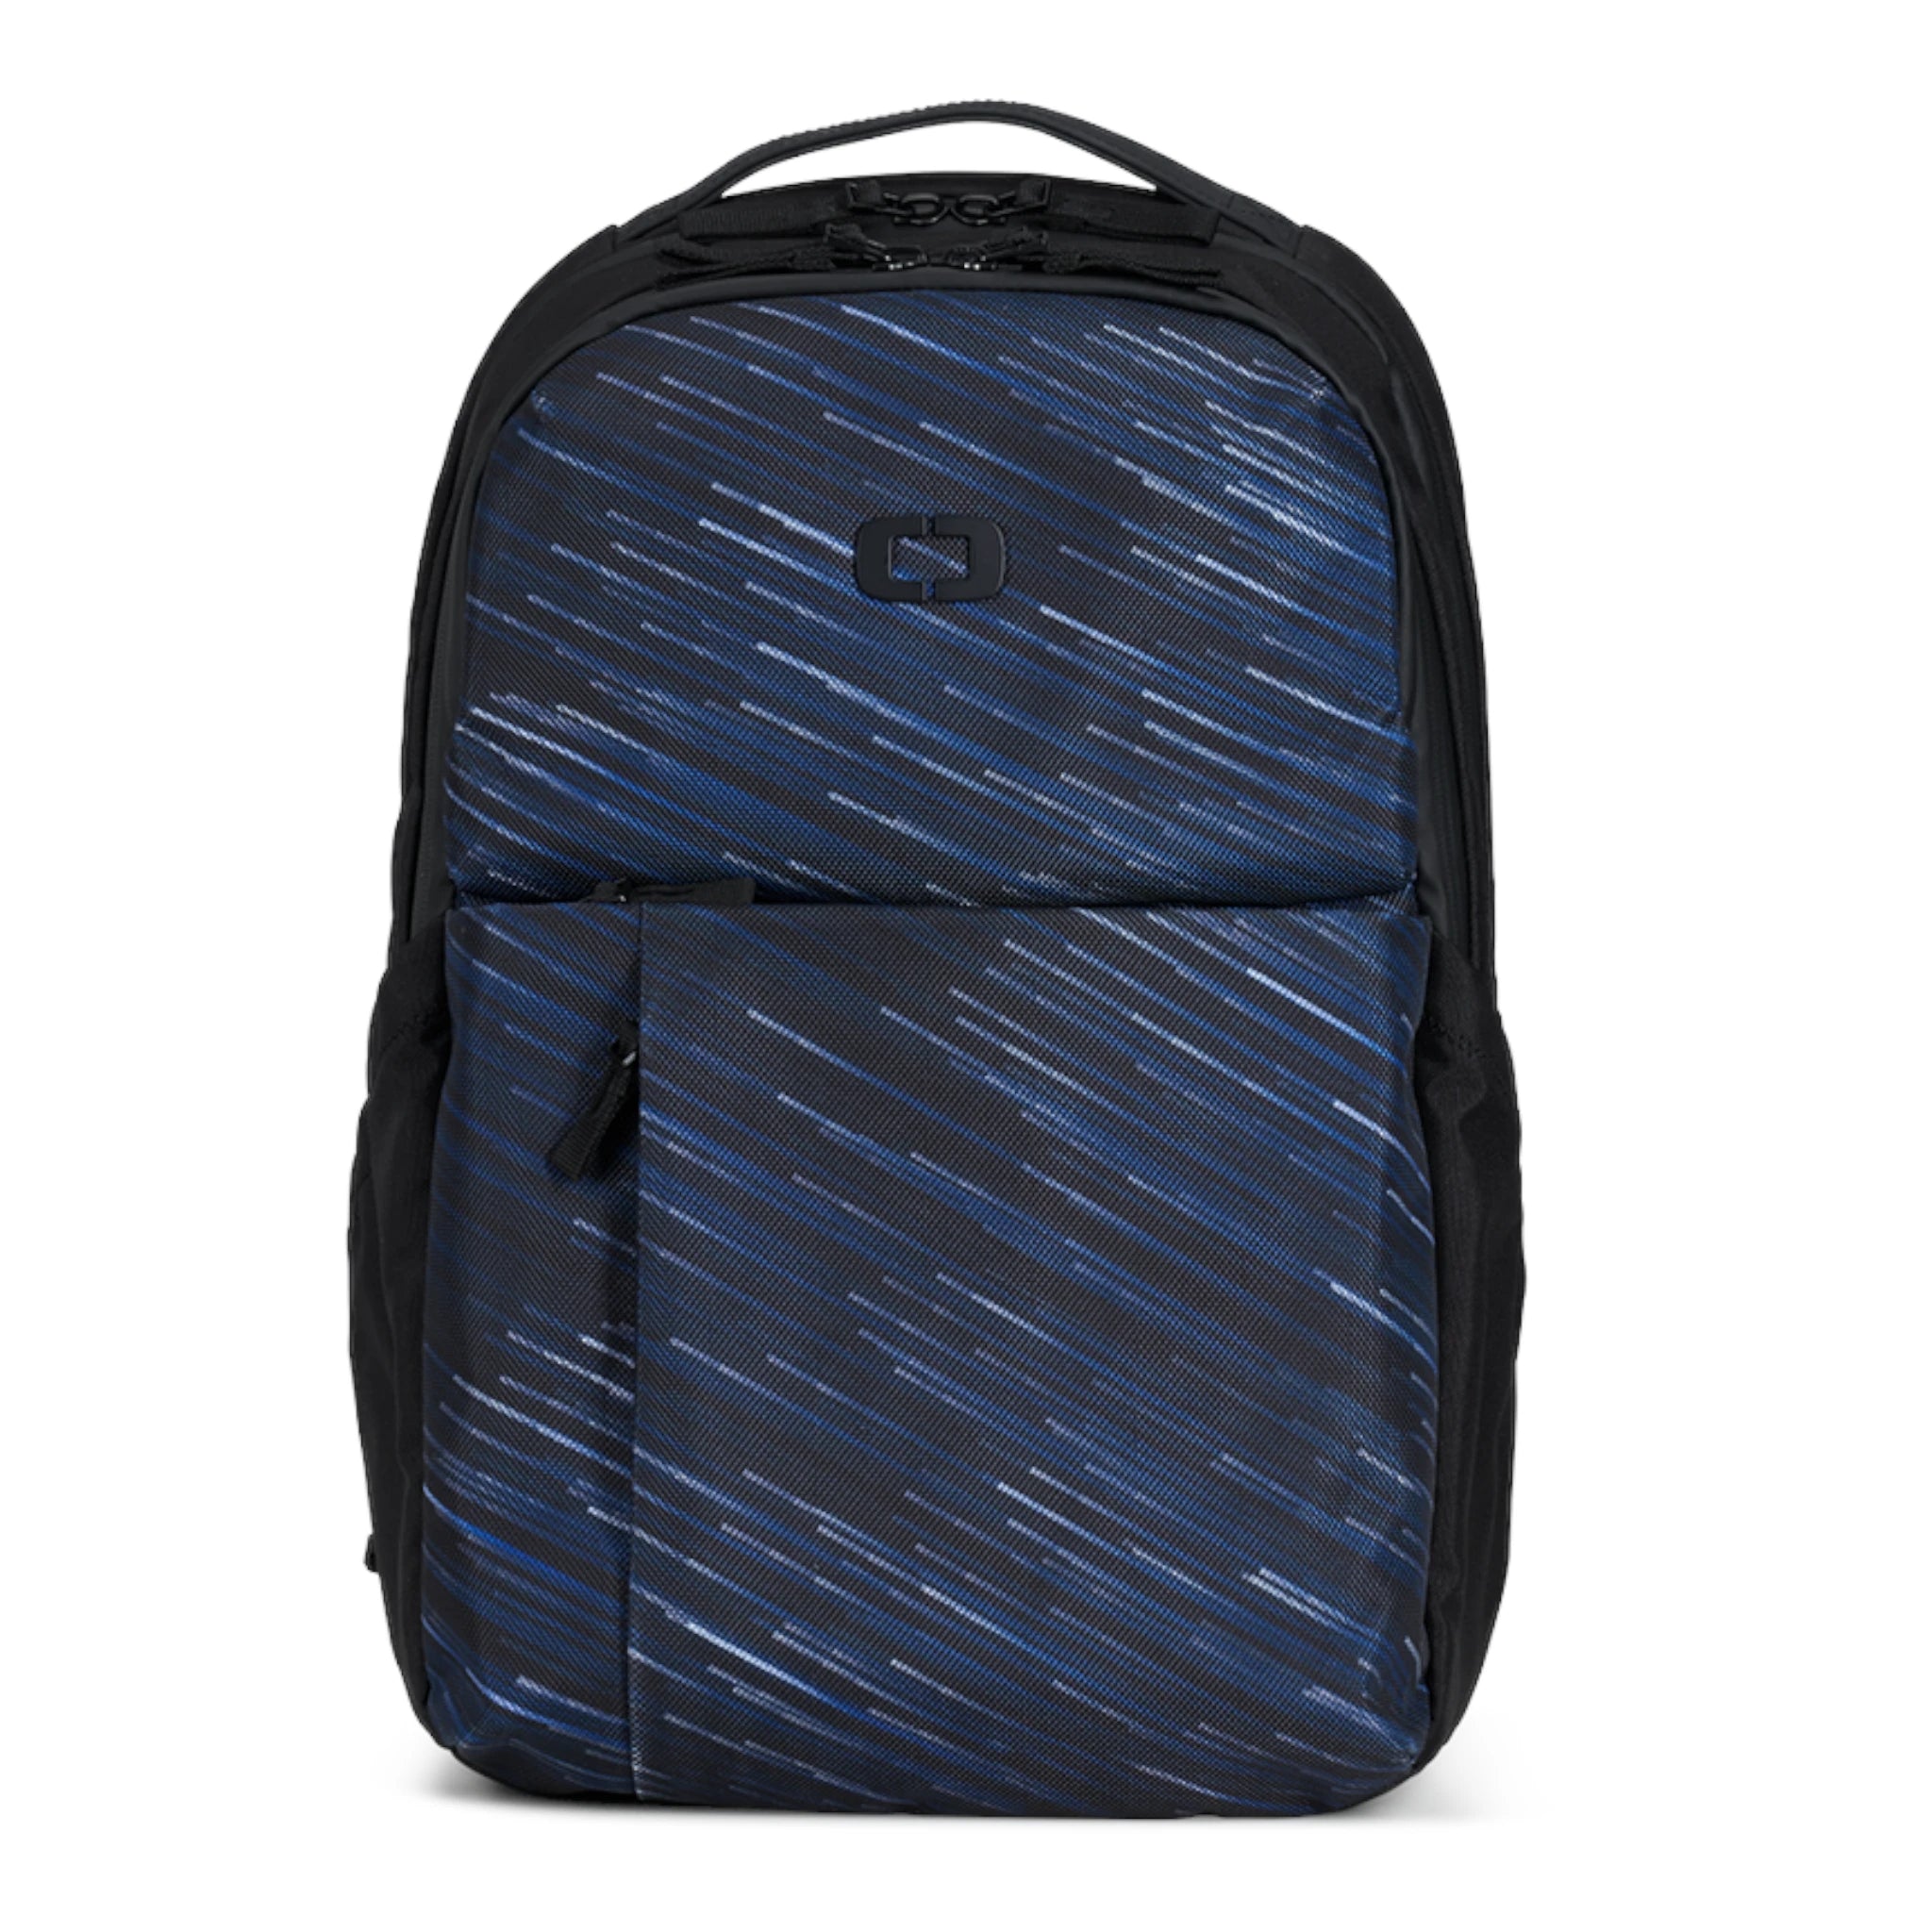 PACE PRO LIMITED EDITION 20L BACKPACK